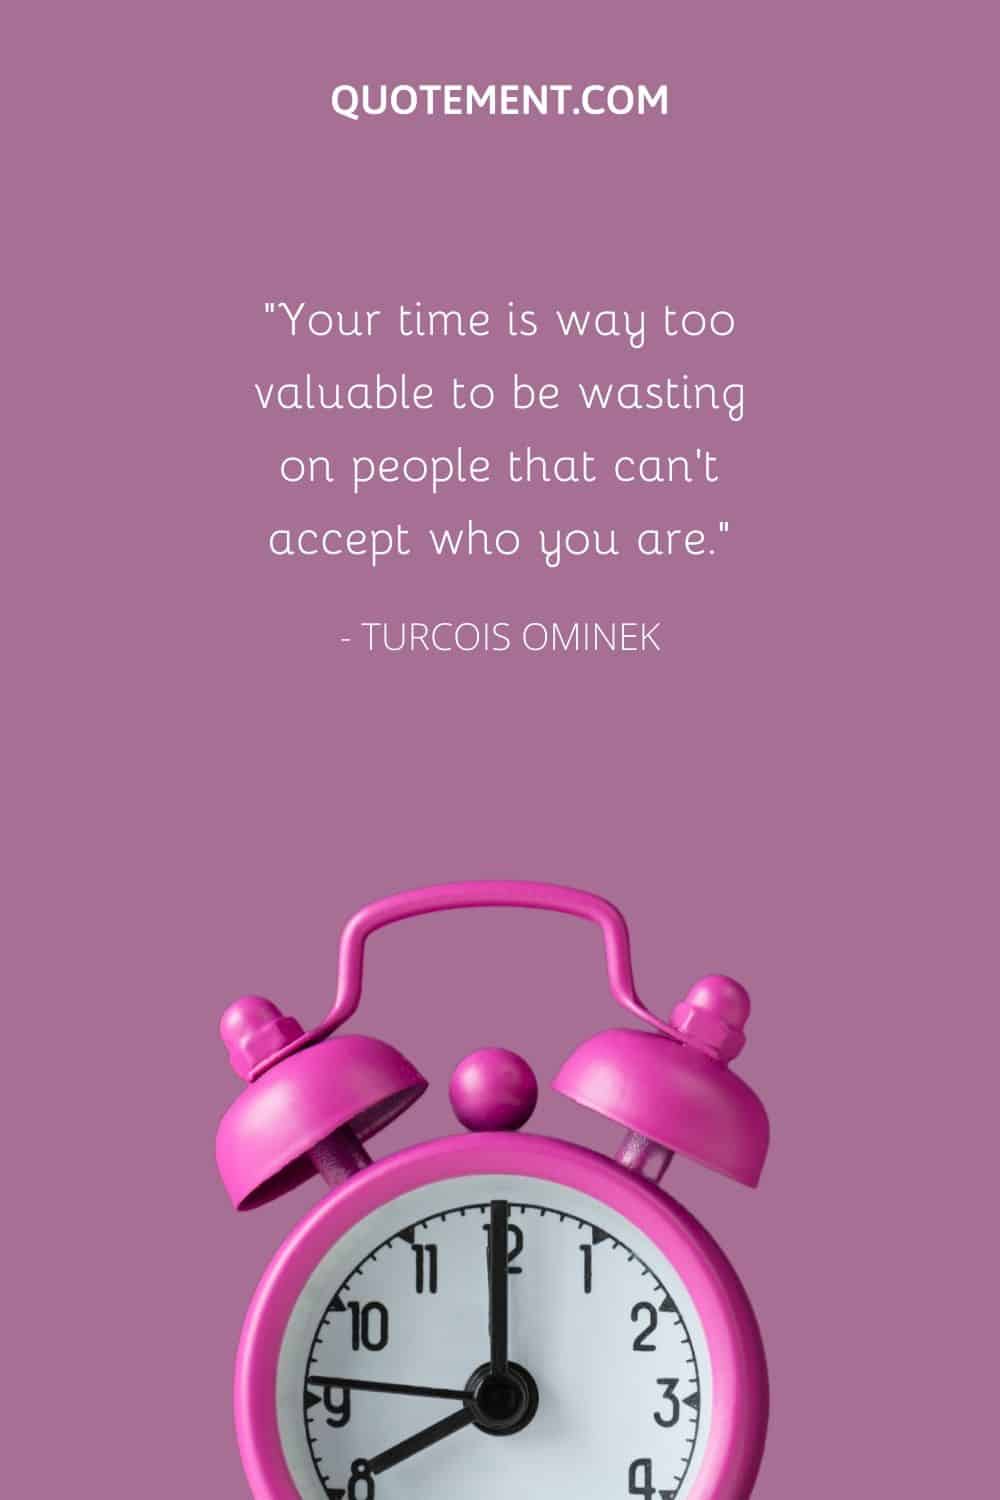 Your time is way too valuable to be wasting on people that can't accept who you are.